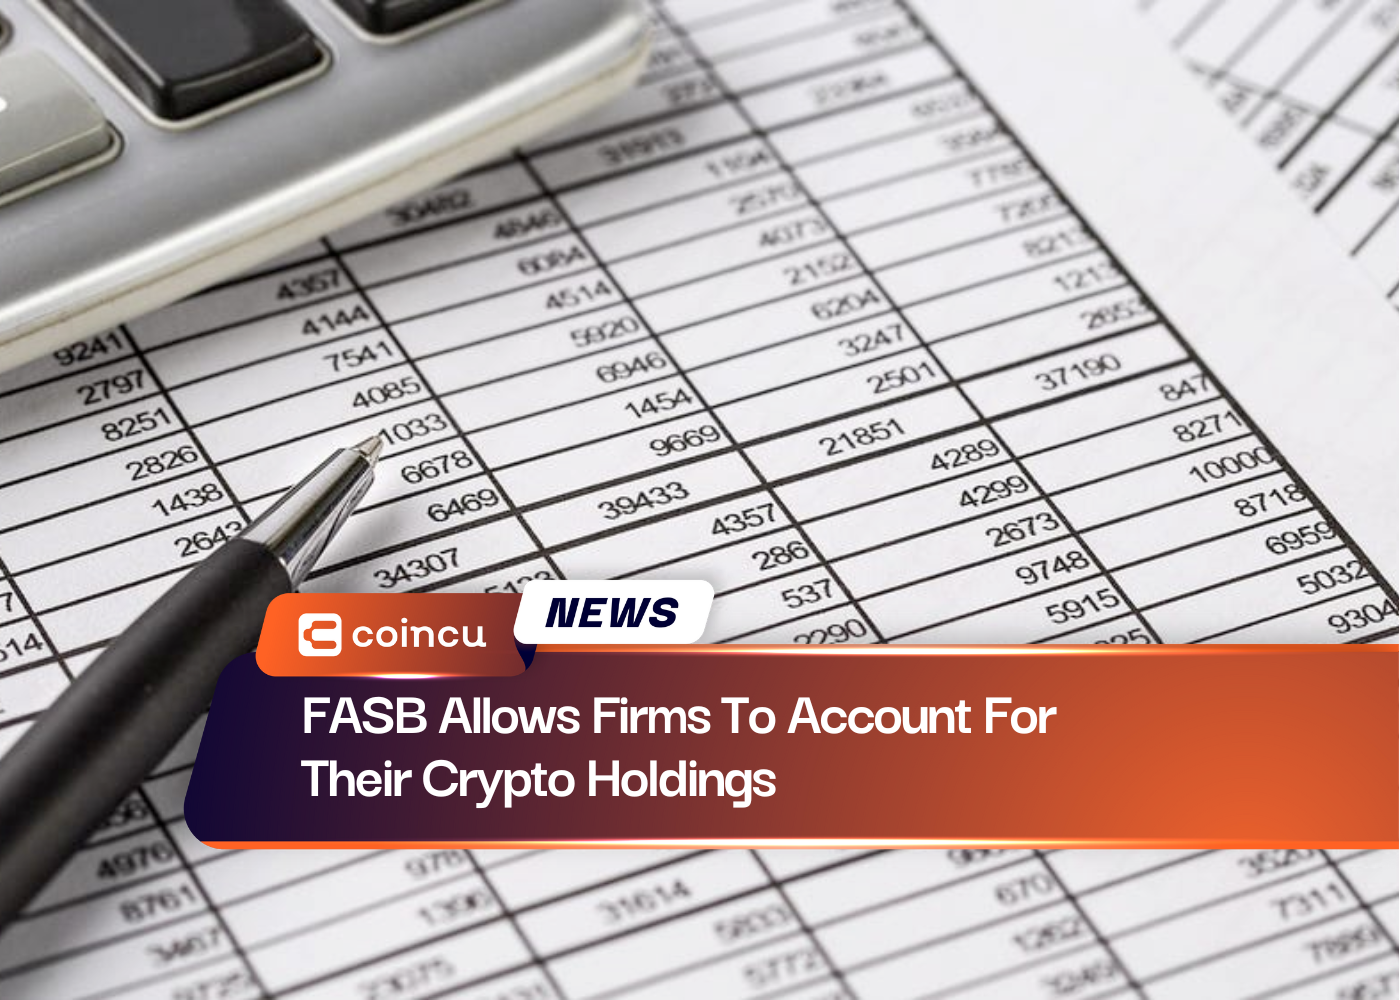 FASB Allows Firms To Account For Their Crypto Holdings